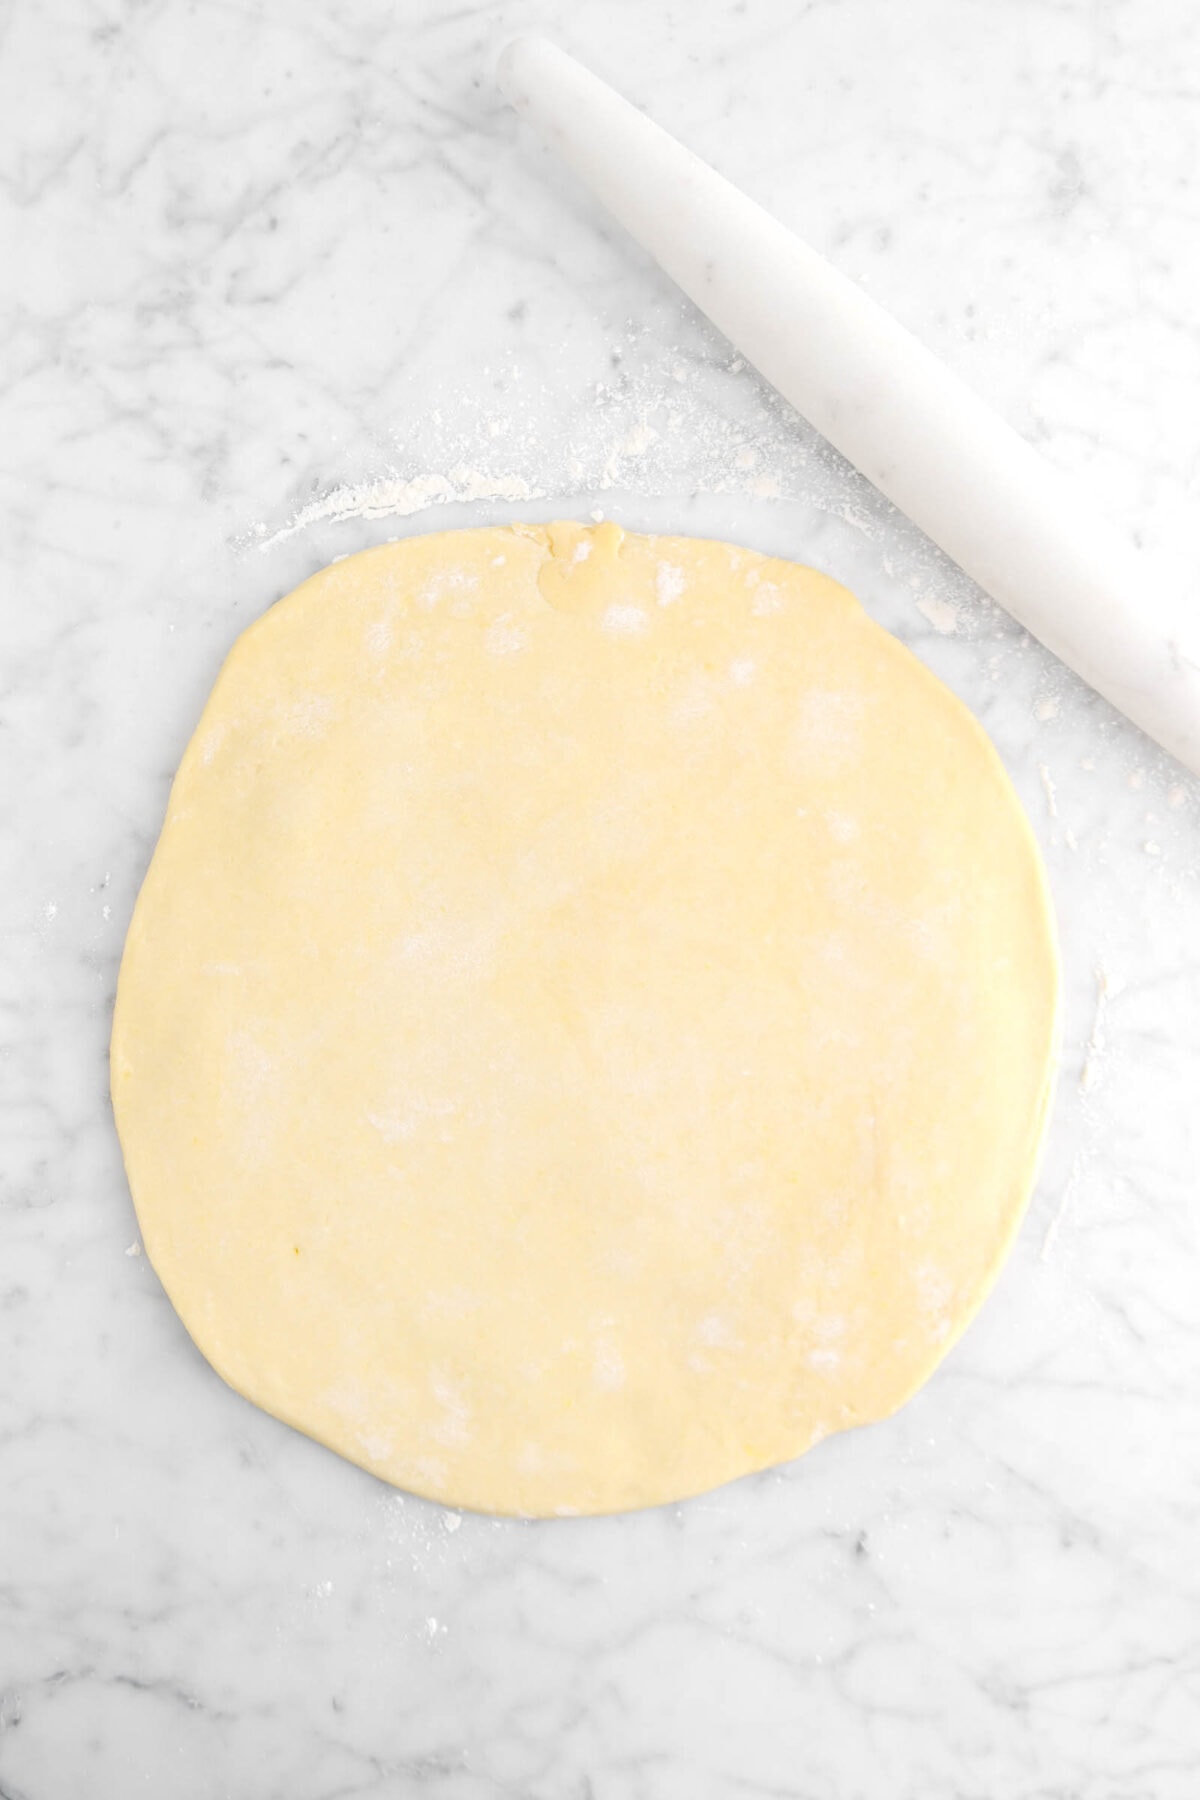 rolled out dough on marble surface with marble rolling pin beside